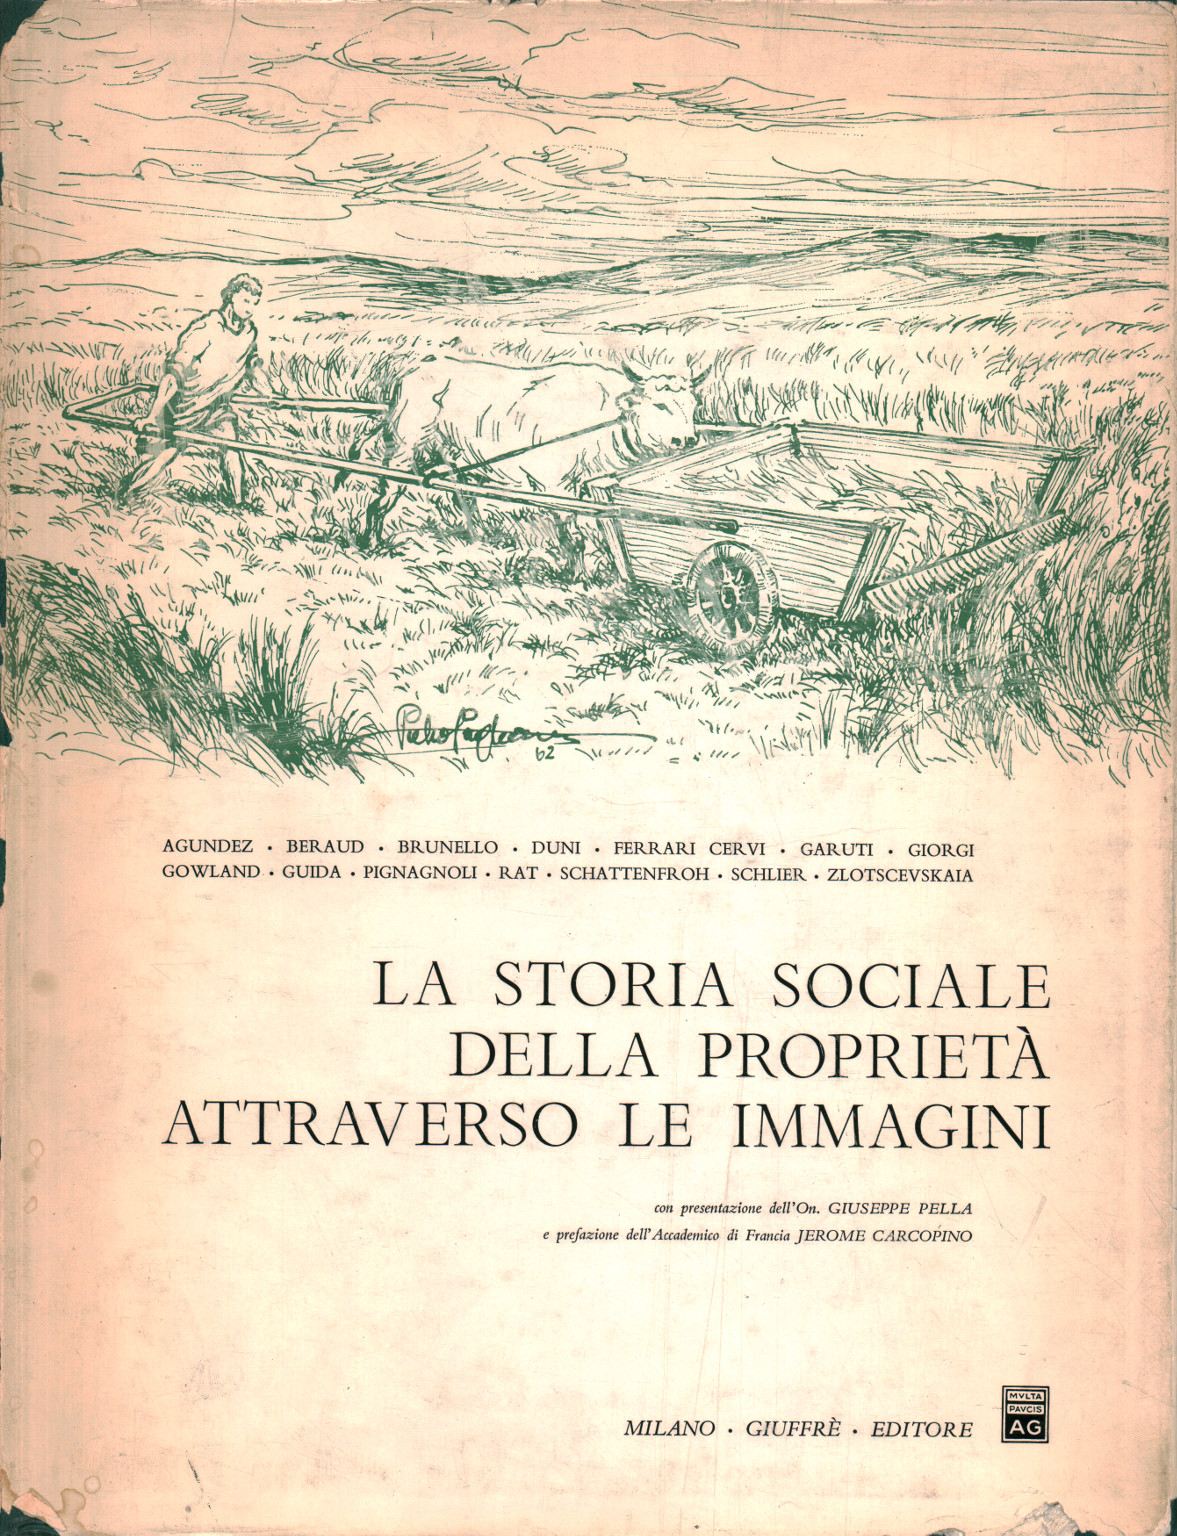 The social history of the property through the, s.a.